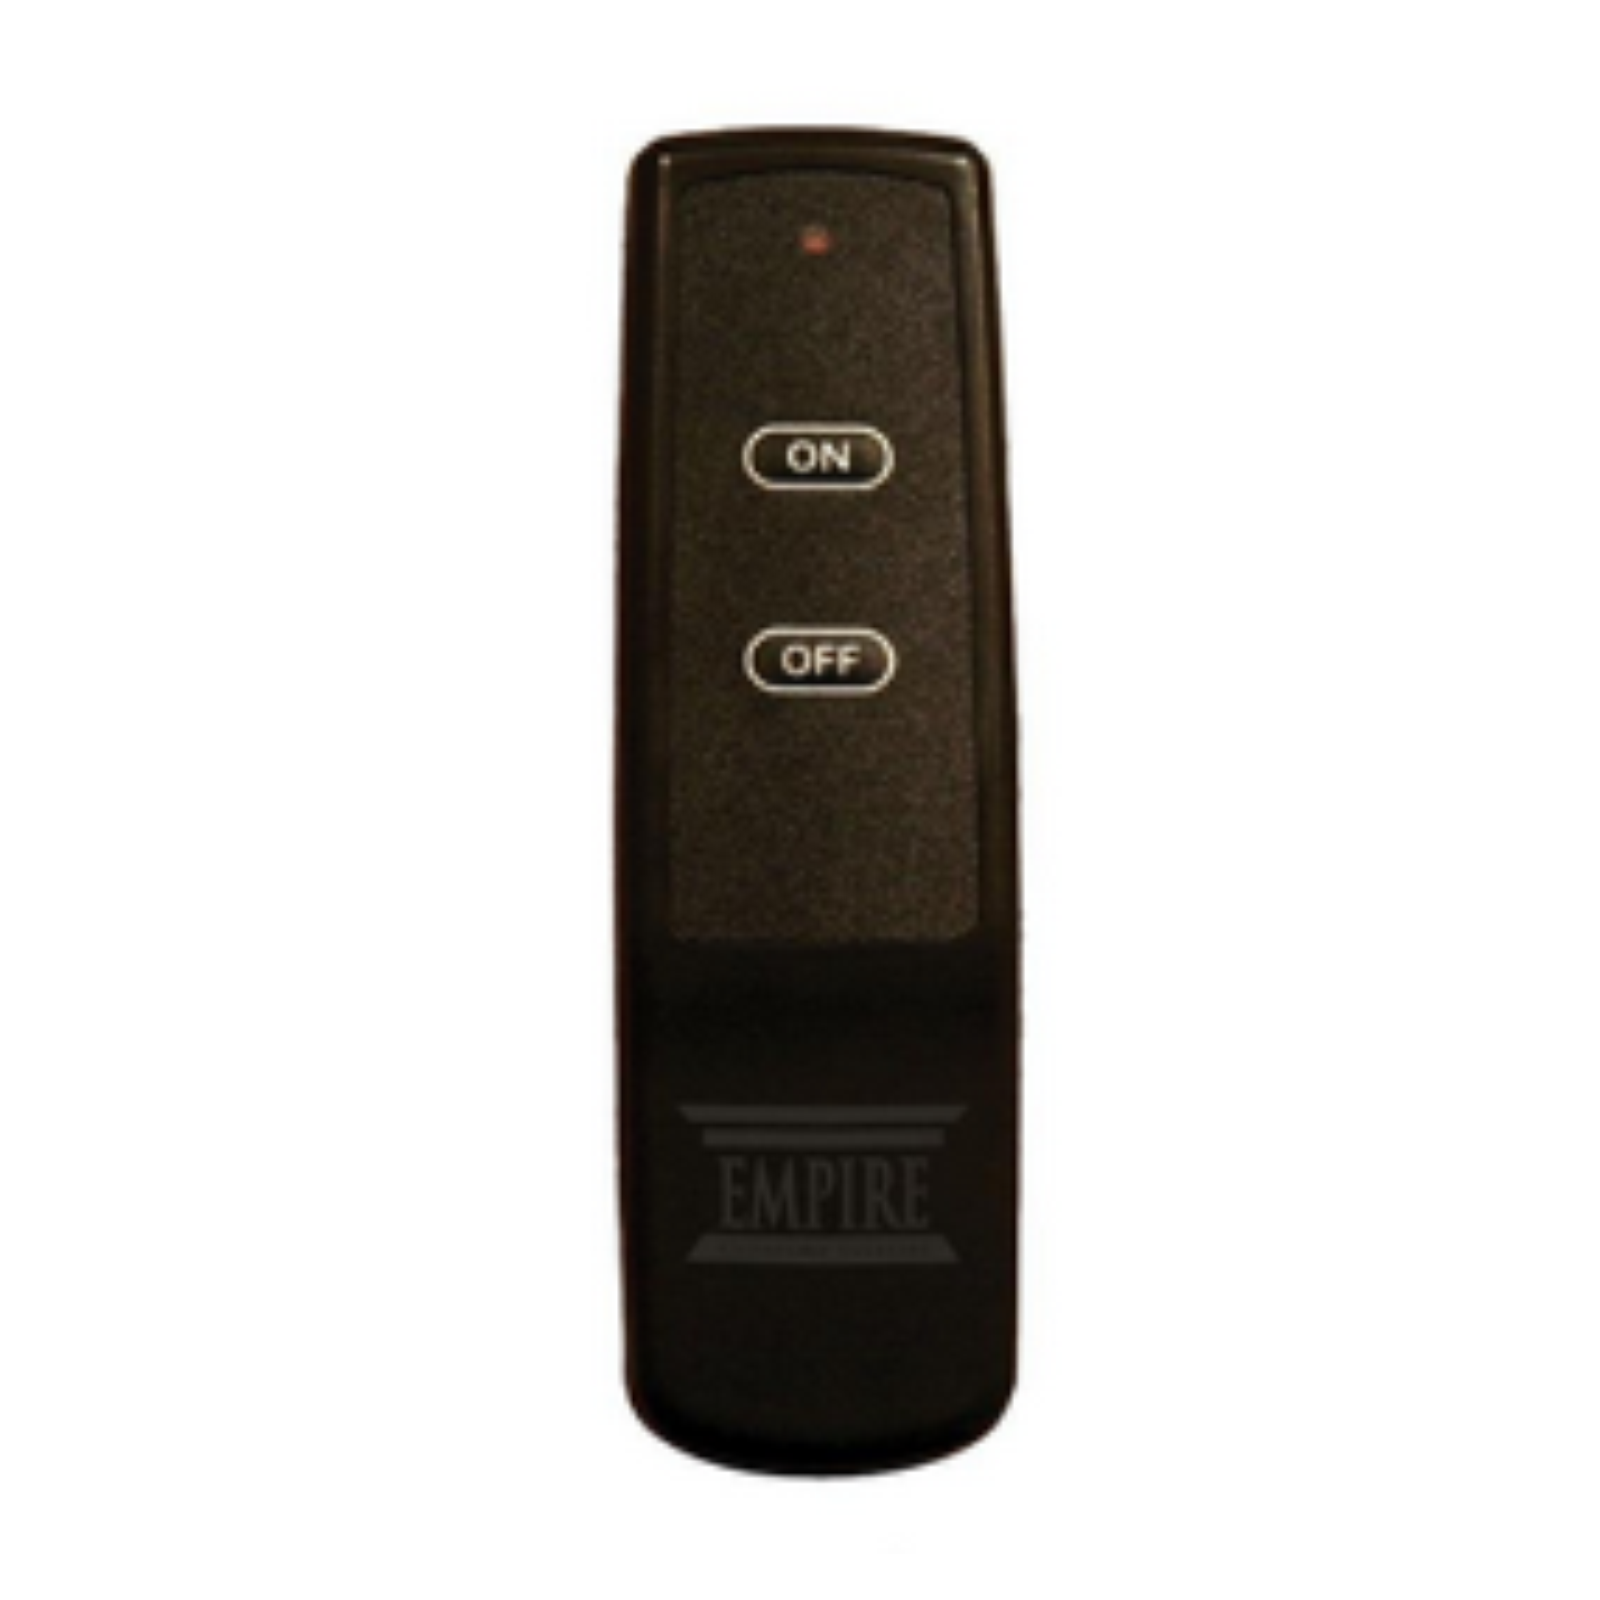 Empire Electric Receiver/Battery Remote On/Off - FREC